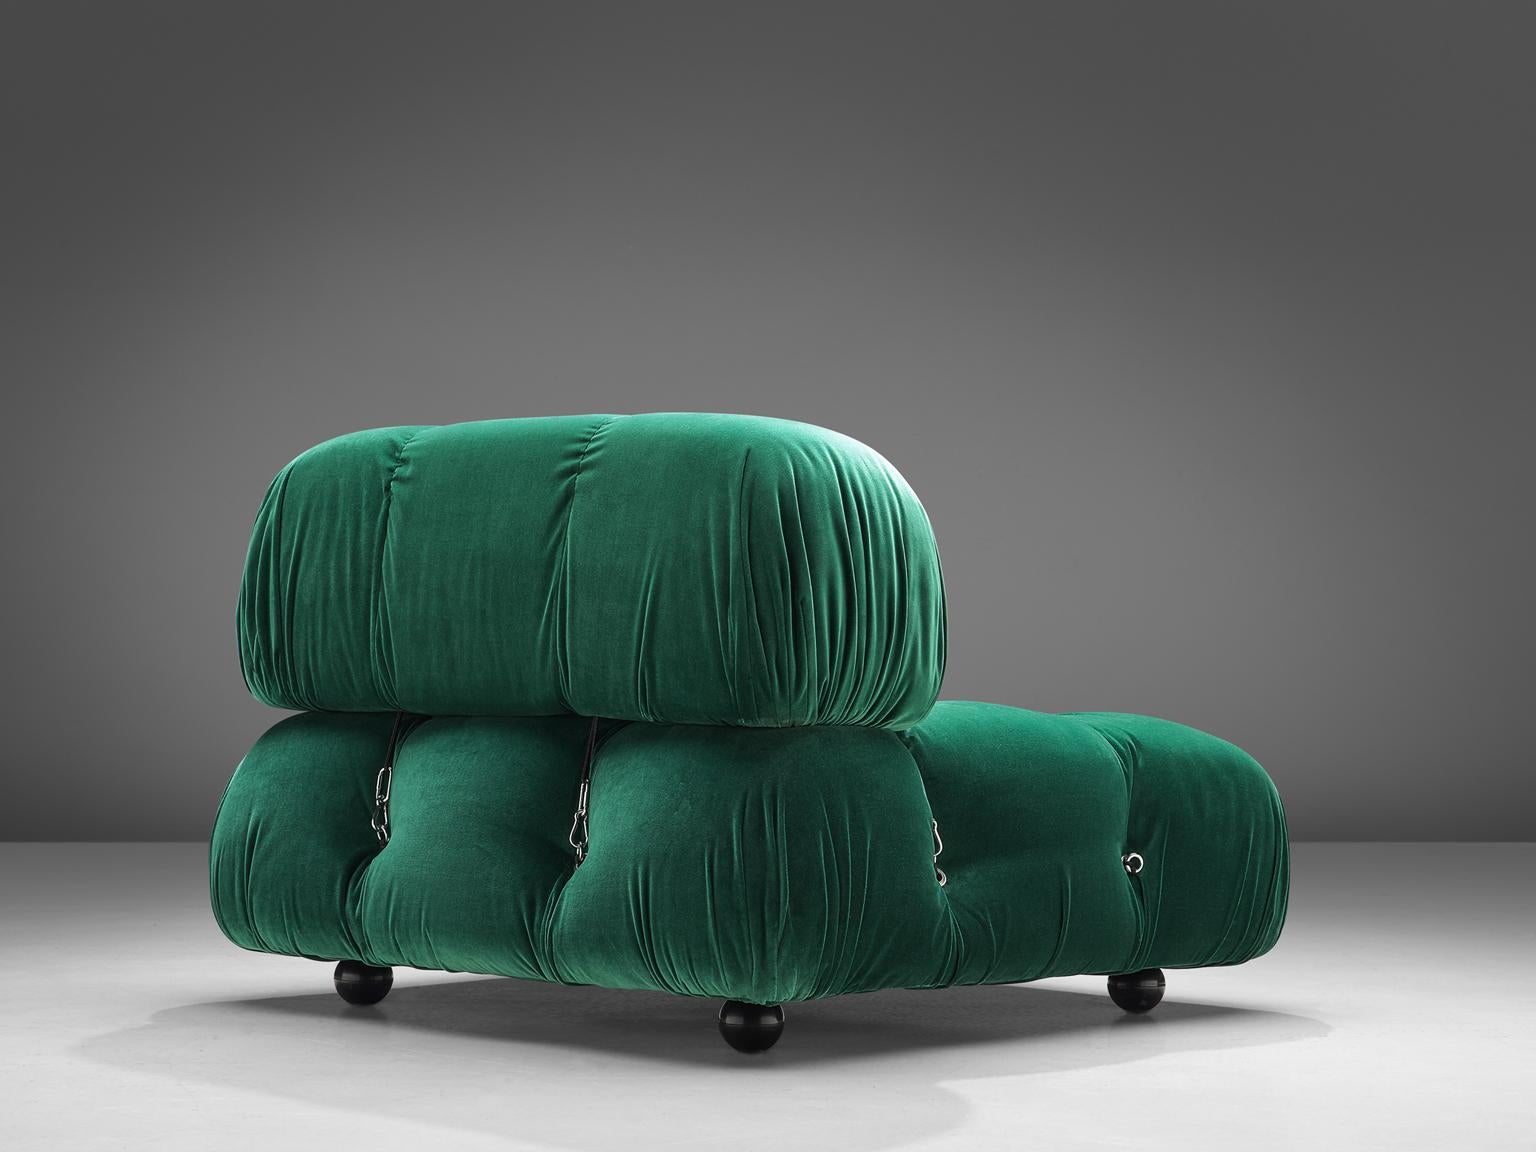 Mario Bellini, modular 'Cameleonda' sofa in green fabric, Italy, 1972.

The sectional elements of this can be used freely and apart from one another. The backs and armrests are provided with rings and carabiners, which allows the user to create a